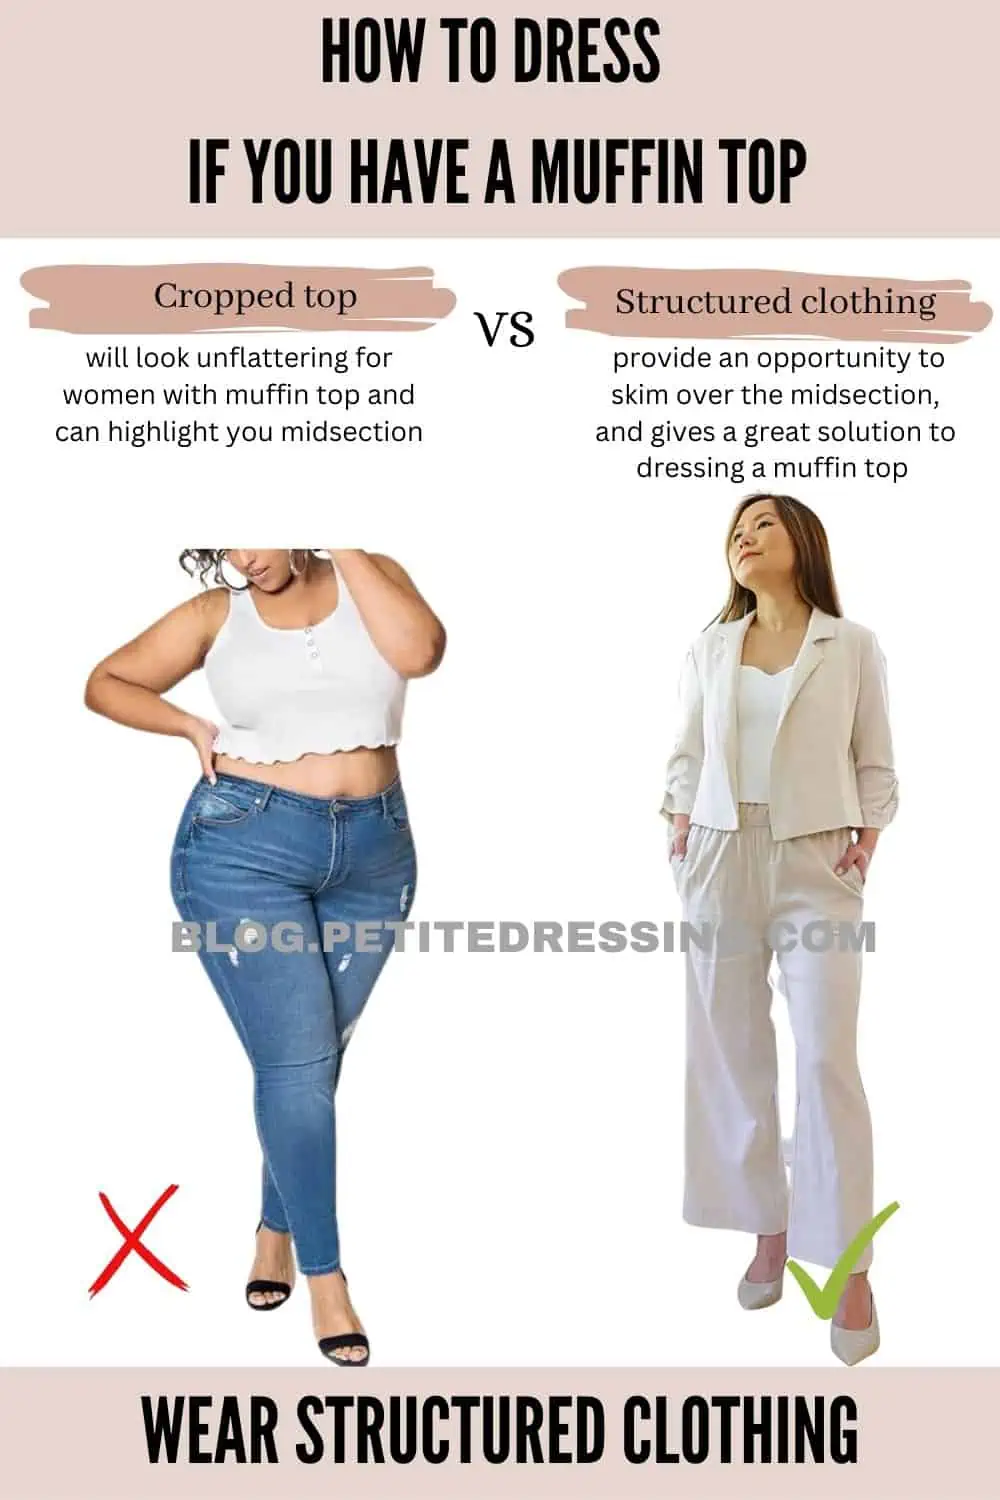 How to Dress if You Have a Muffin Top